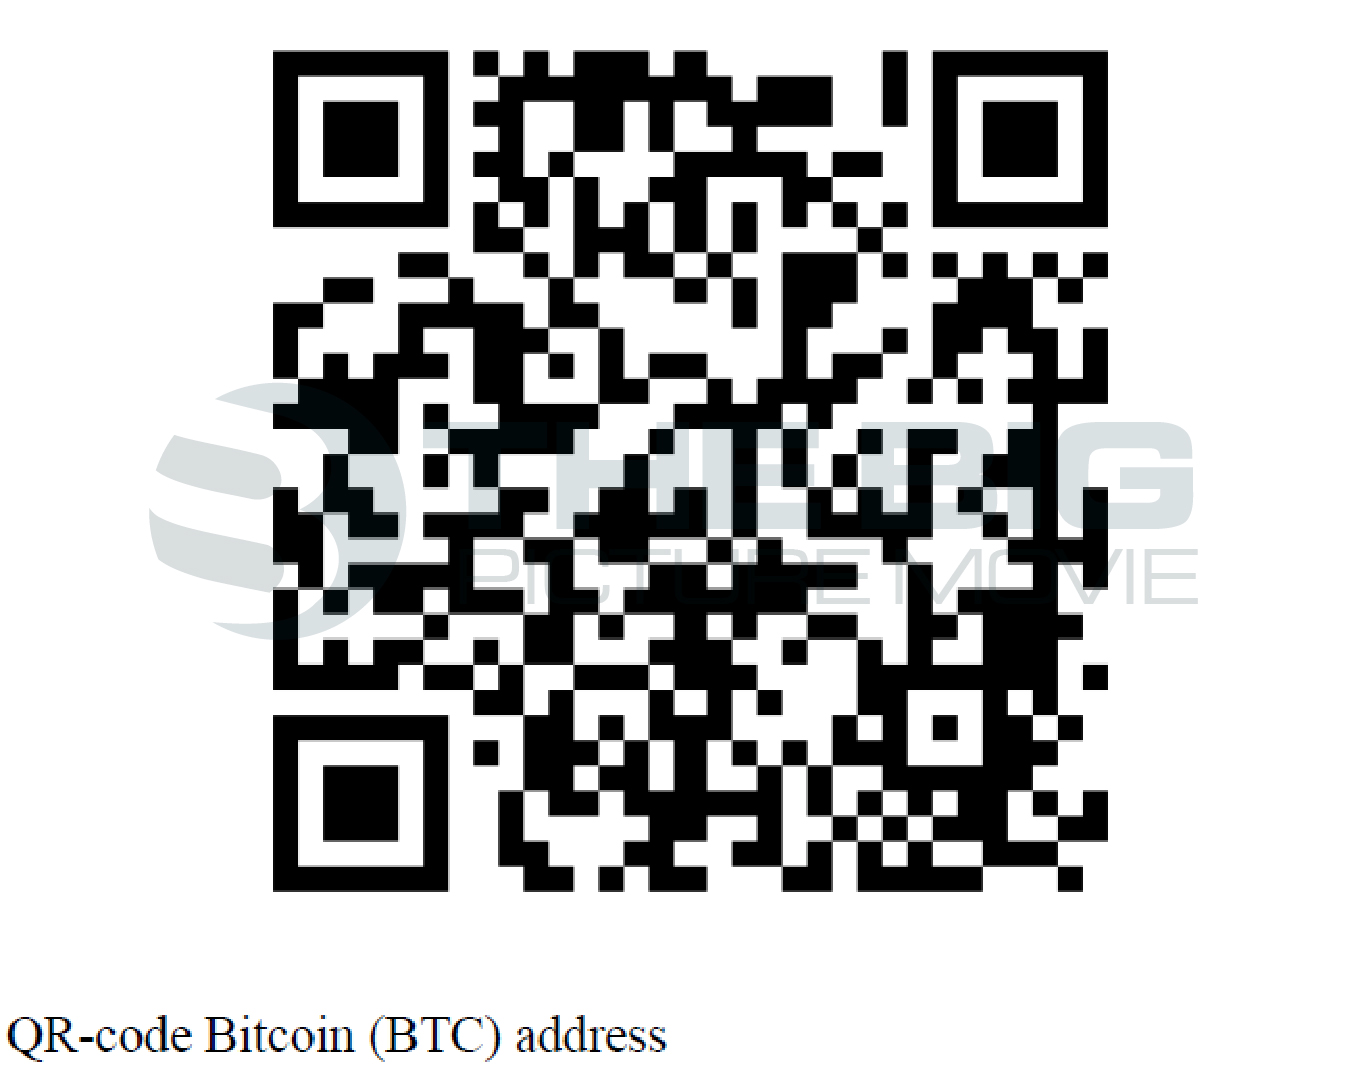 Select the payment method to withdraw Bitcoin cash app